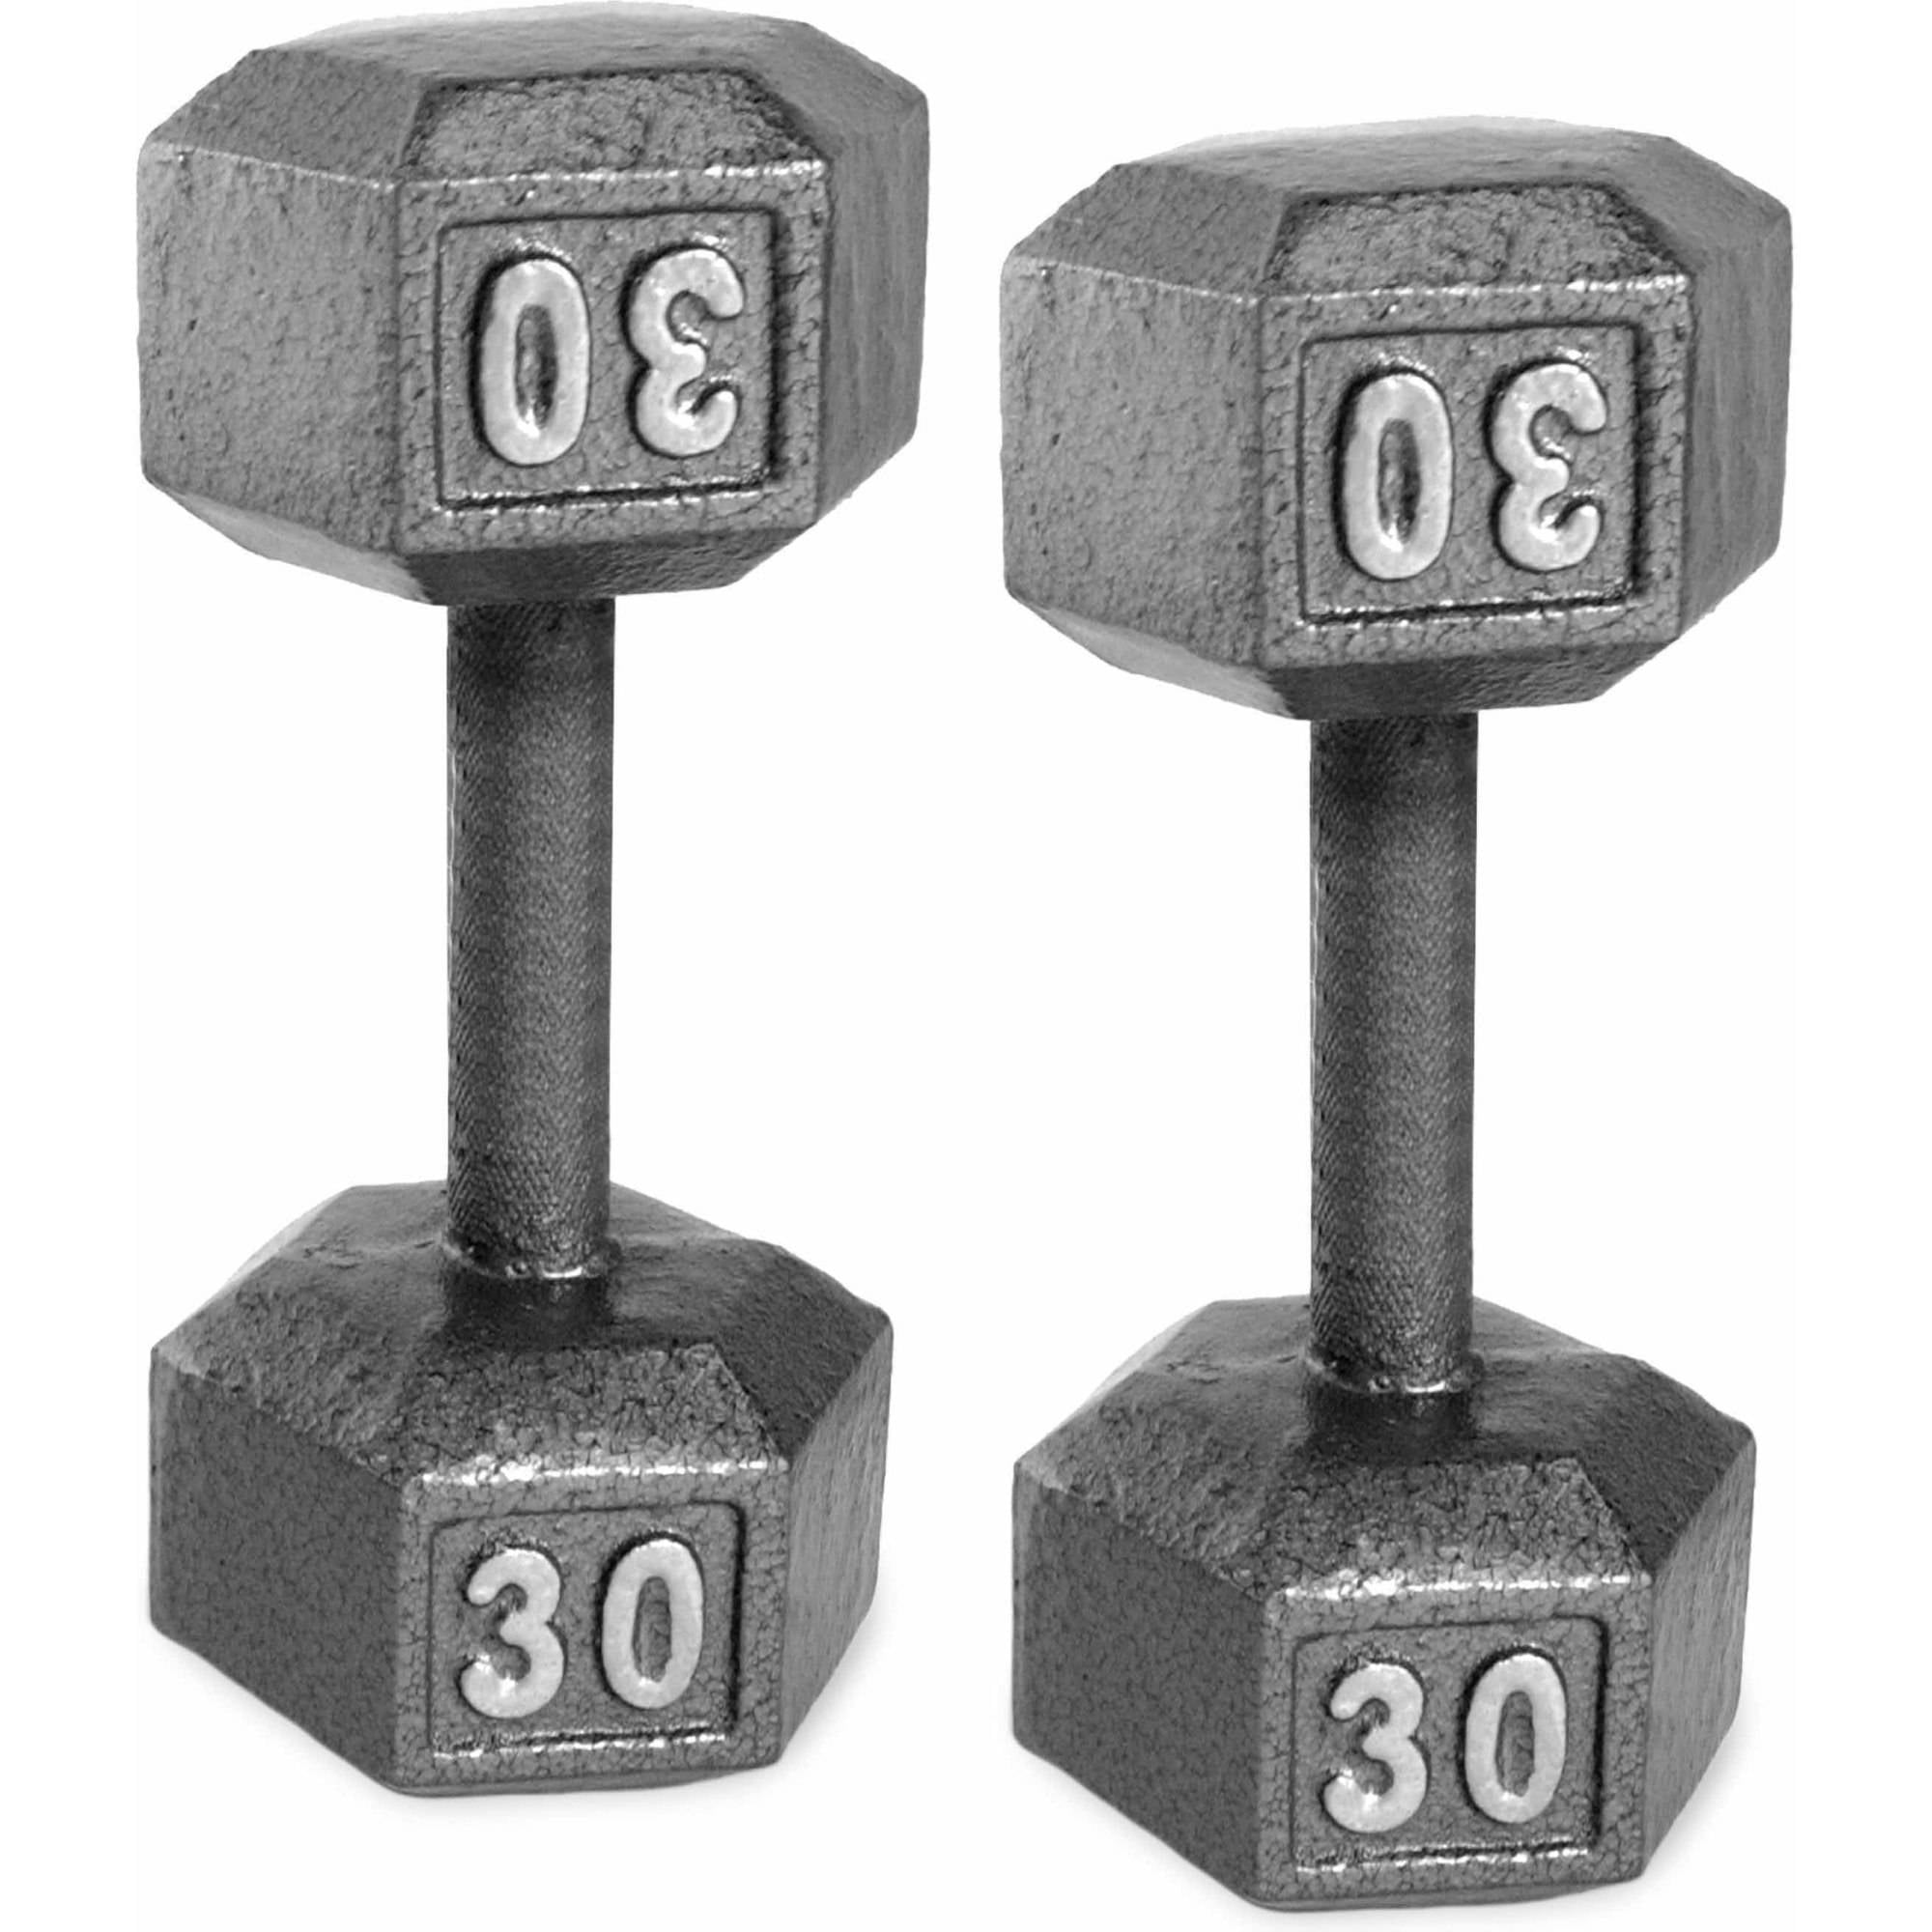 From CAP BARBELL 60 lb TOTAL ERGO Contour Handle 30 lb Cast Iron Dumbbell Pair 